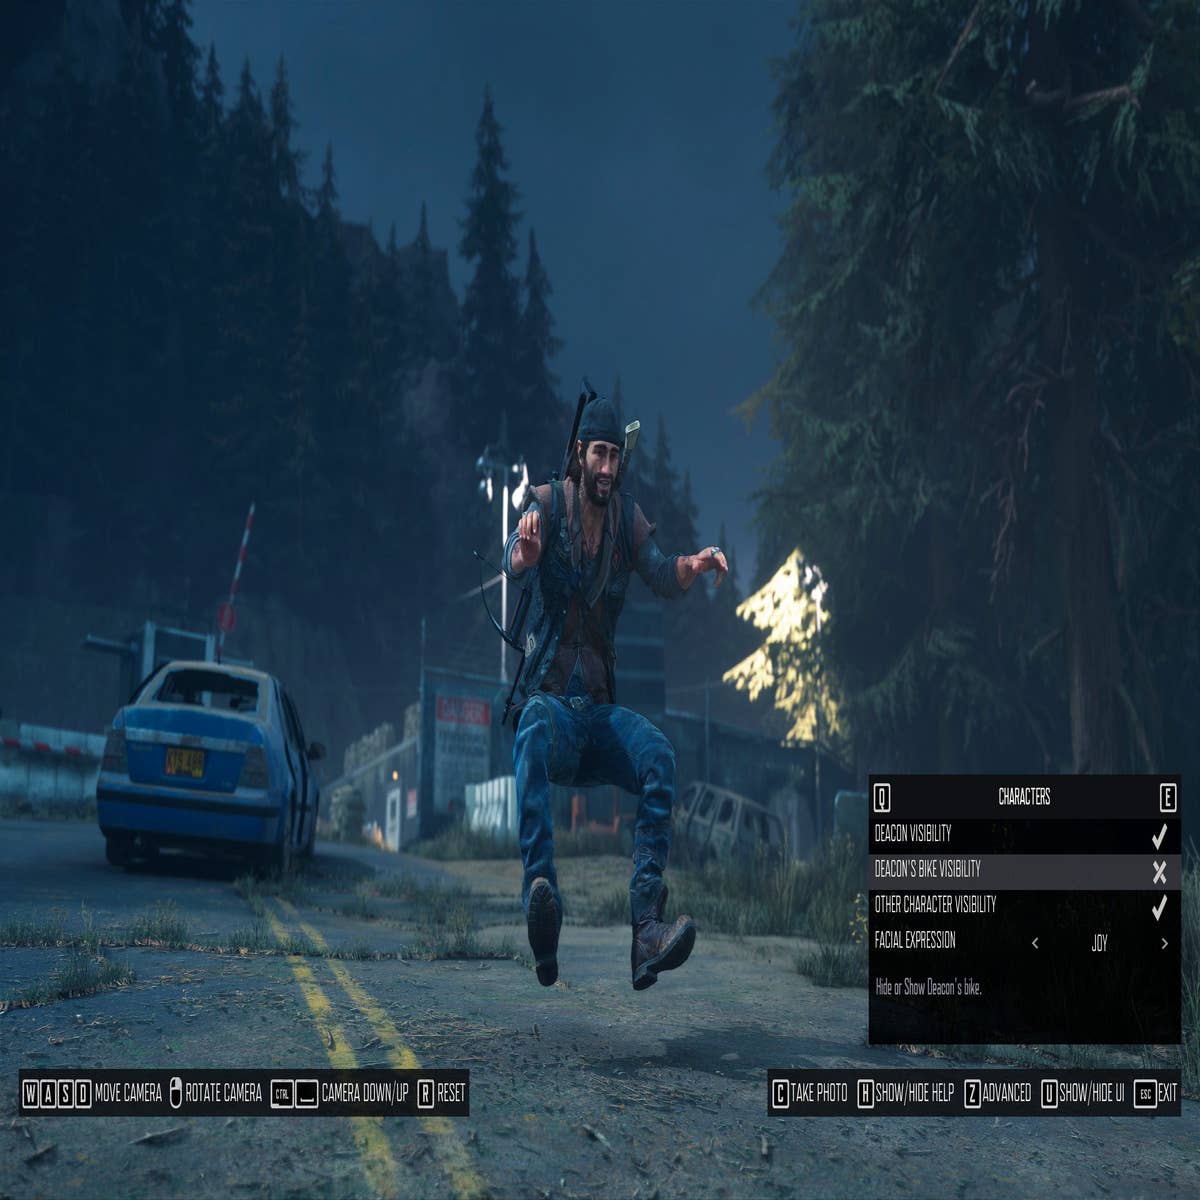 Days Gone, the newest PlayStation video game, may evolve into series